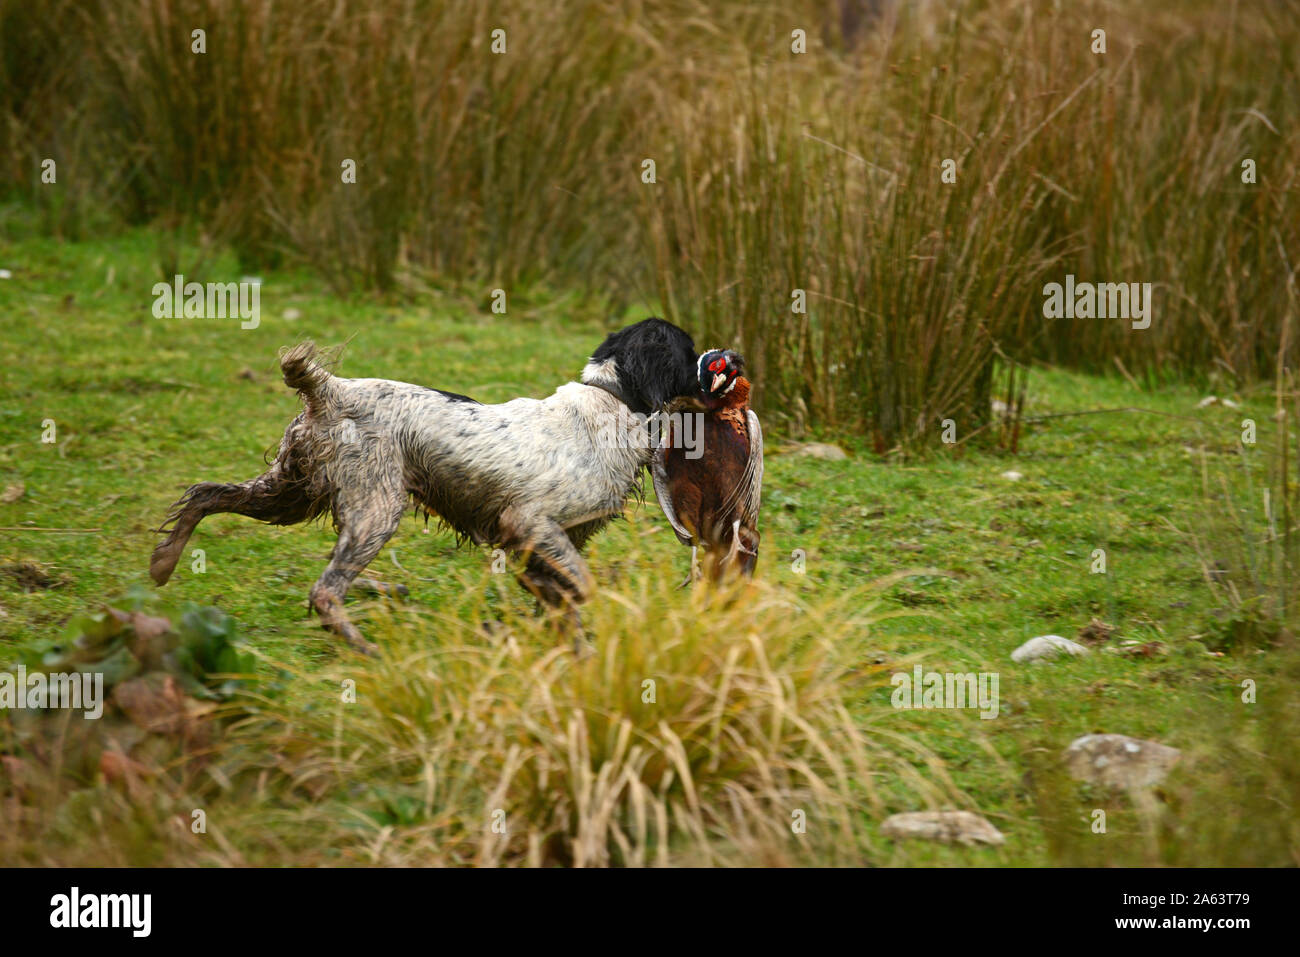 A retriever collects a bird during a pheasant hunt on the West Coast of New Zealand. Stock Photo